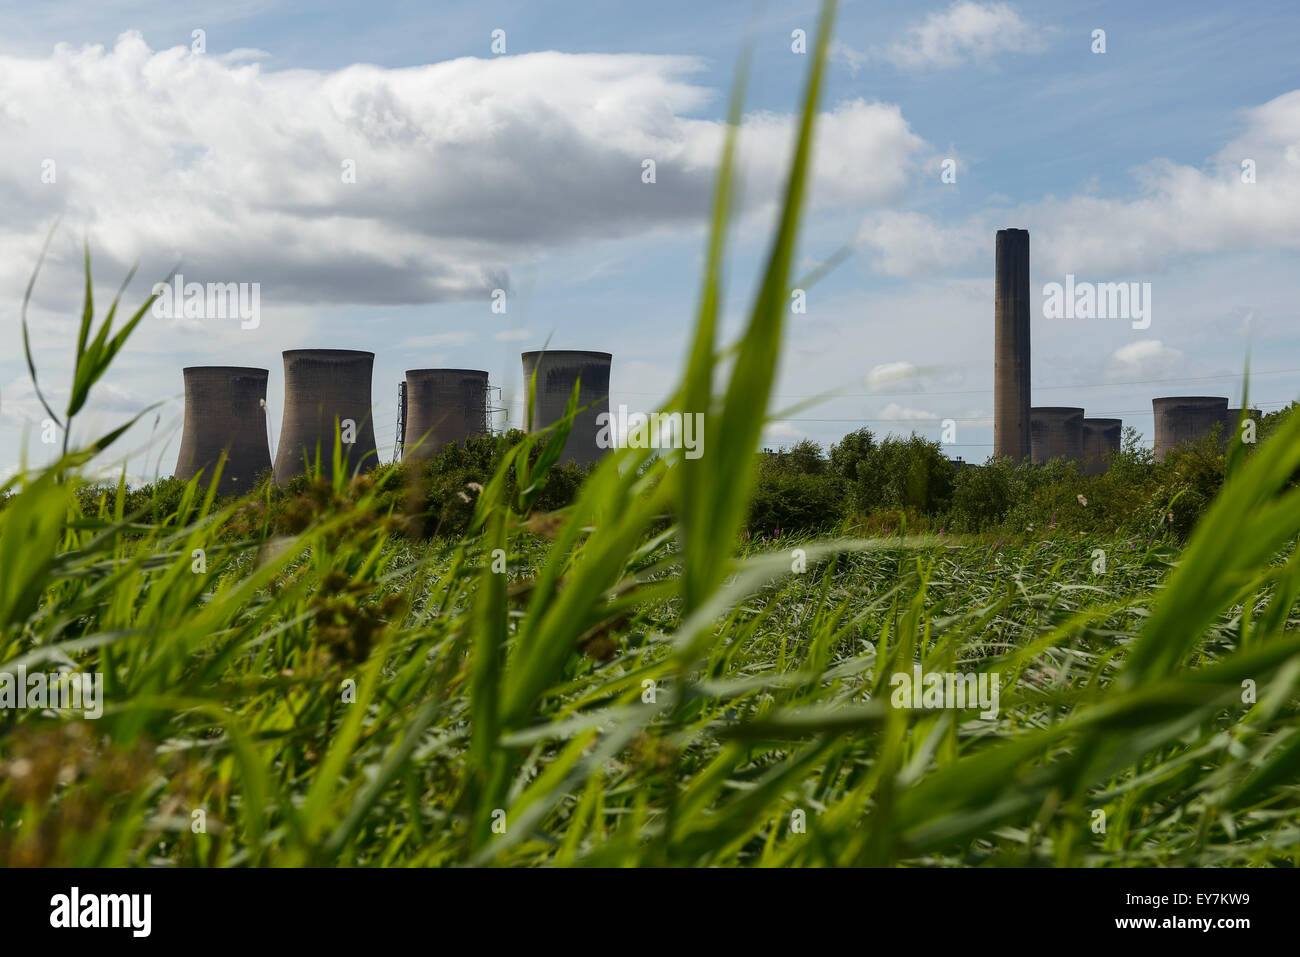 Fiddlers Ferry power station viewed through tall vegetation UK Stock Photo